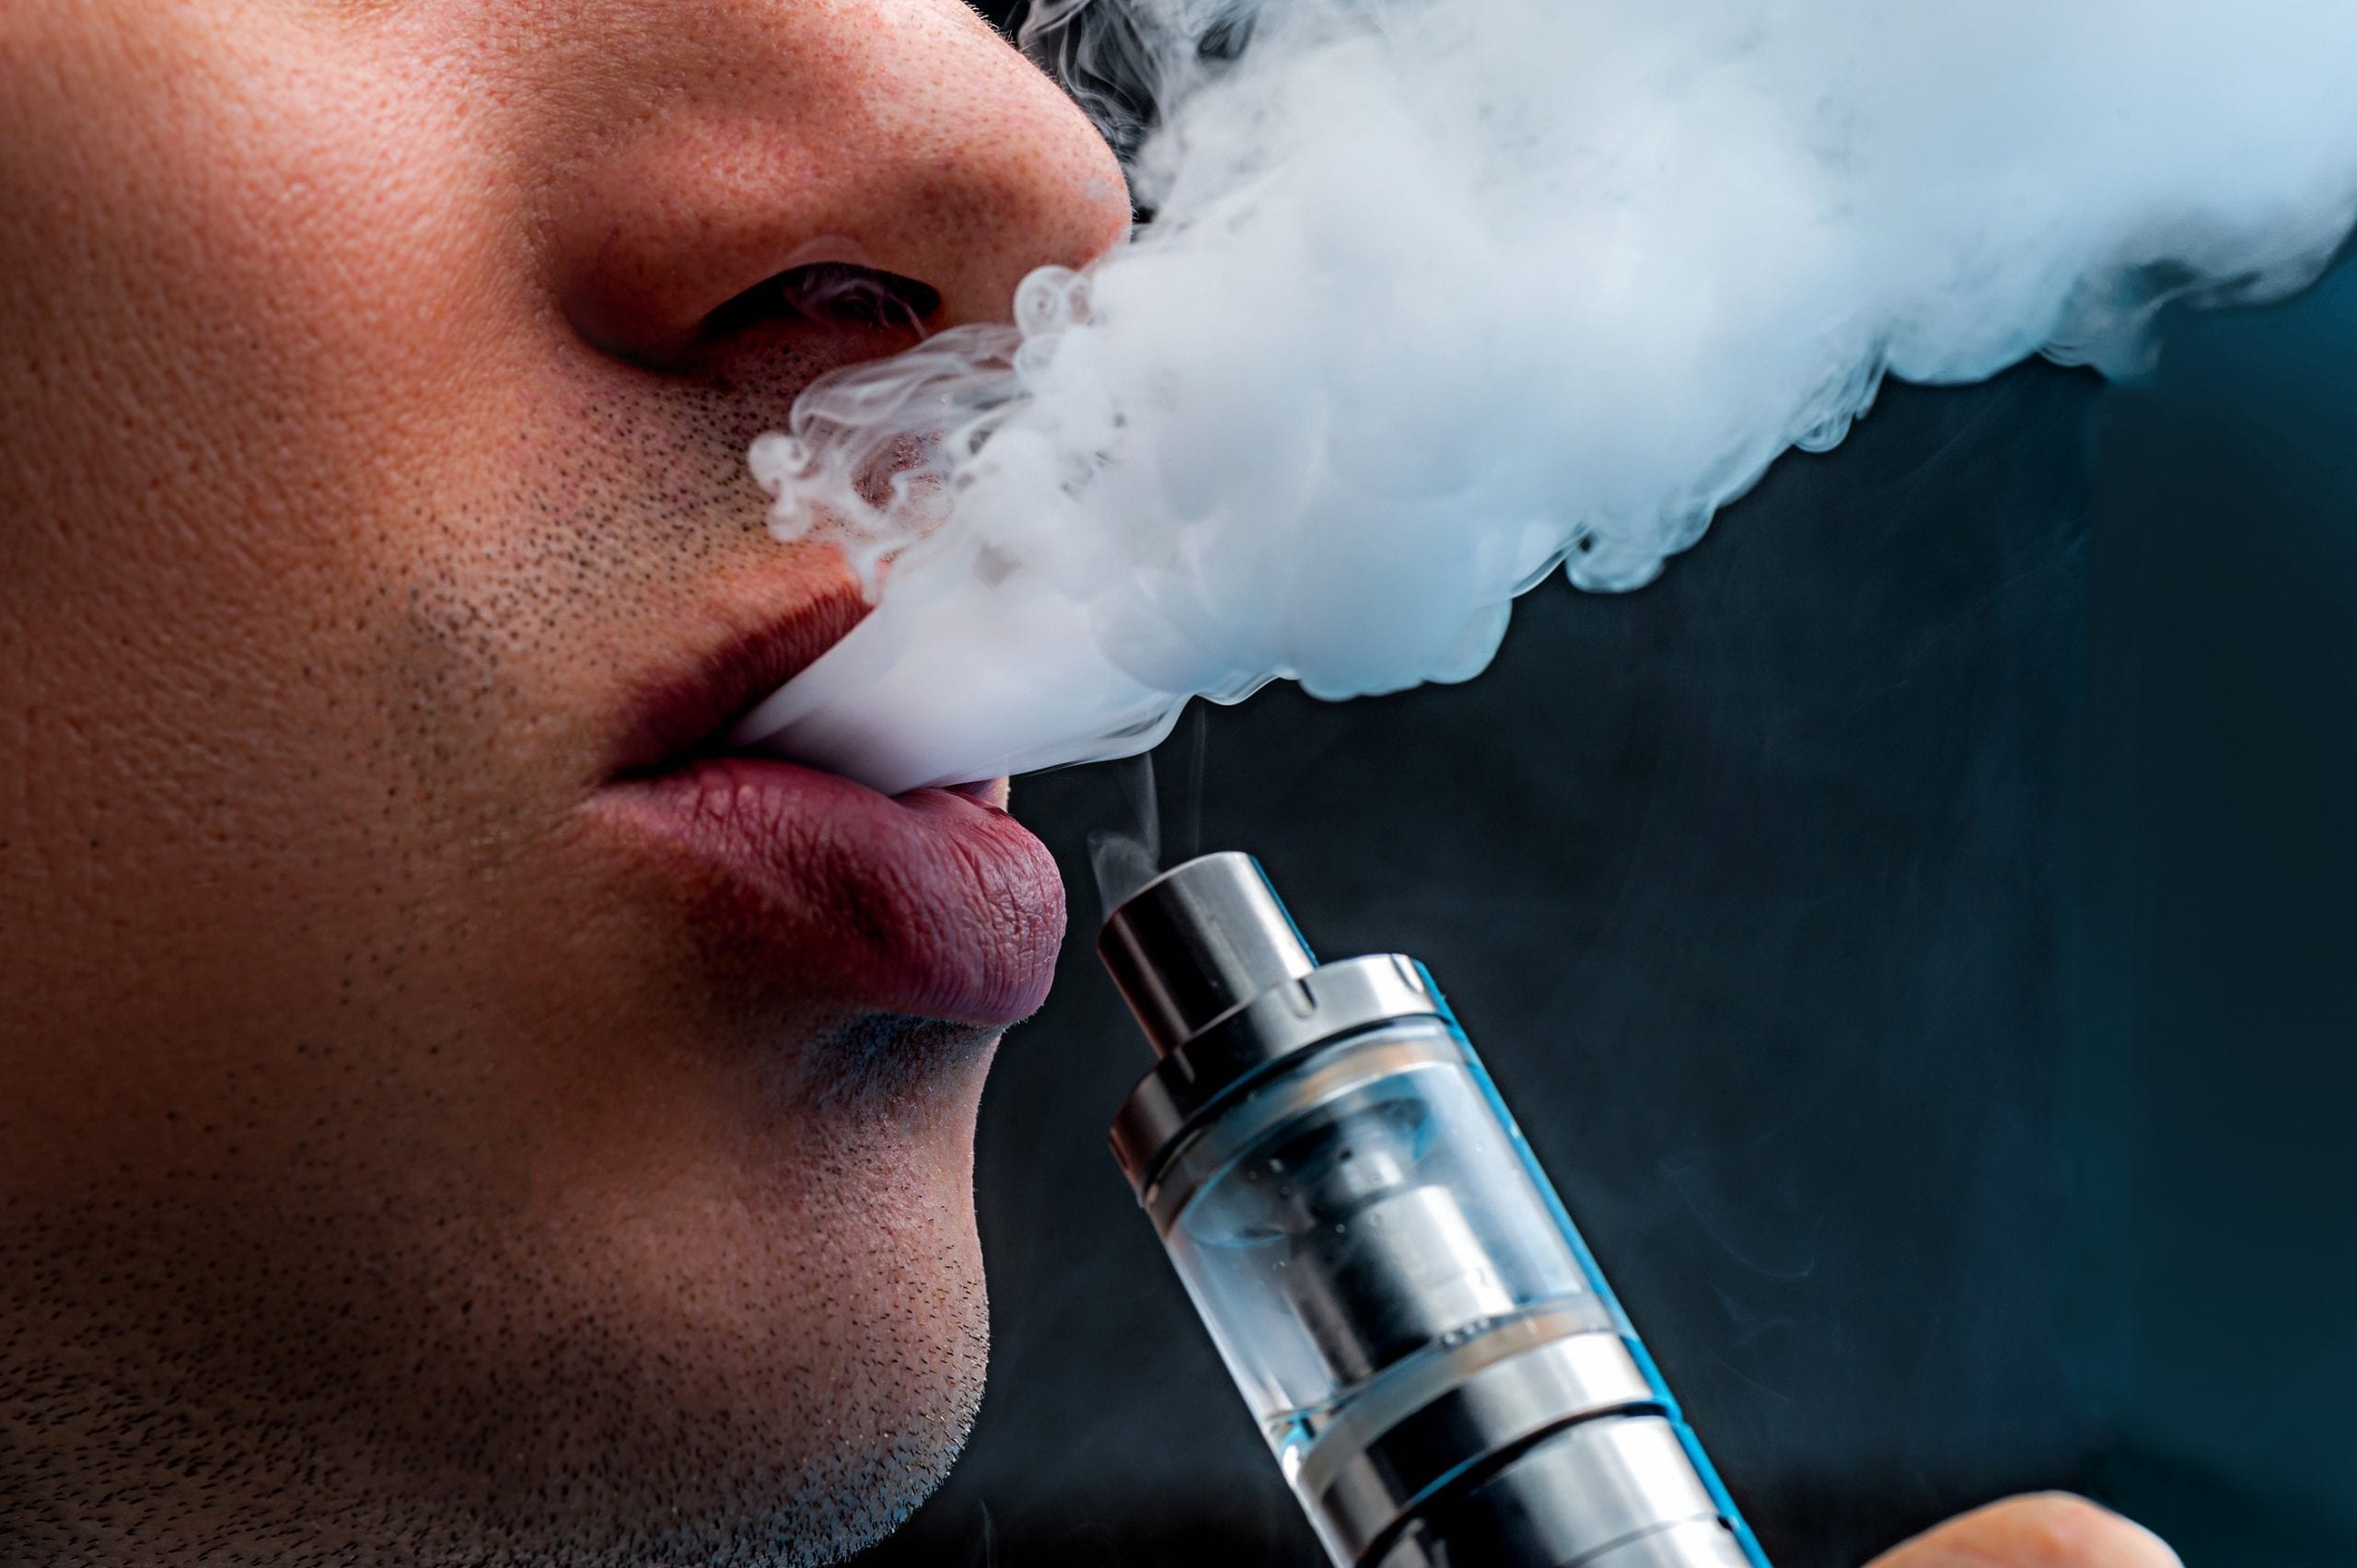 Singers and Models in Music Videos Play a Big Part in Promoting Vaping